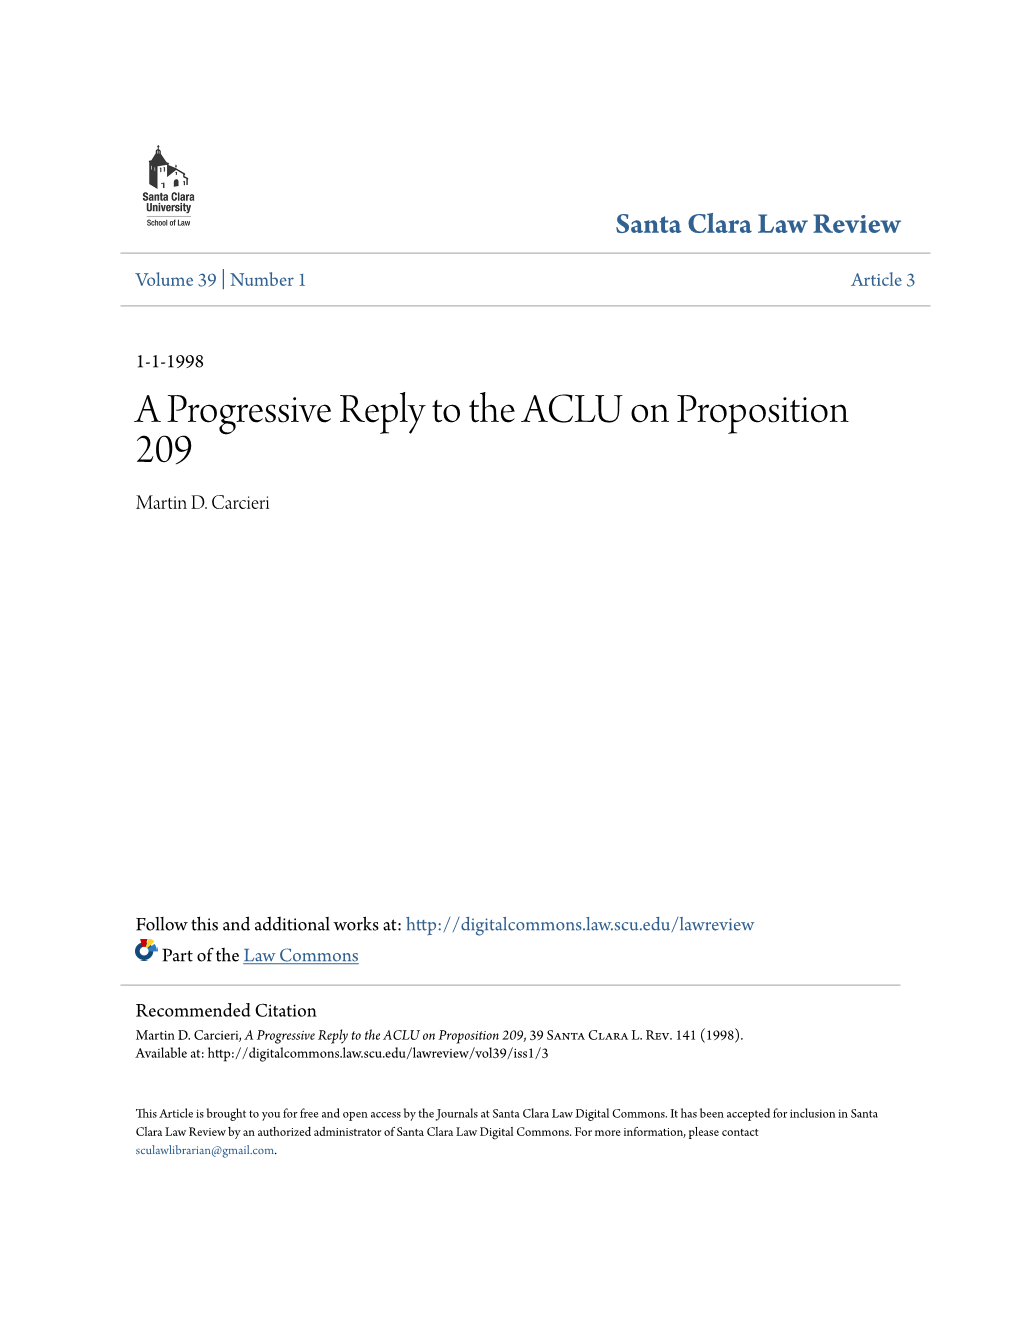 A Progressive Reply to the ACLU on Proposition 209 Martin D